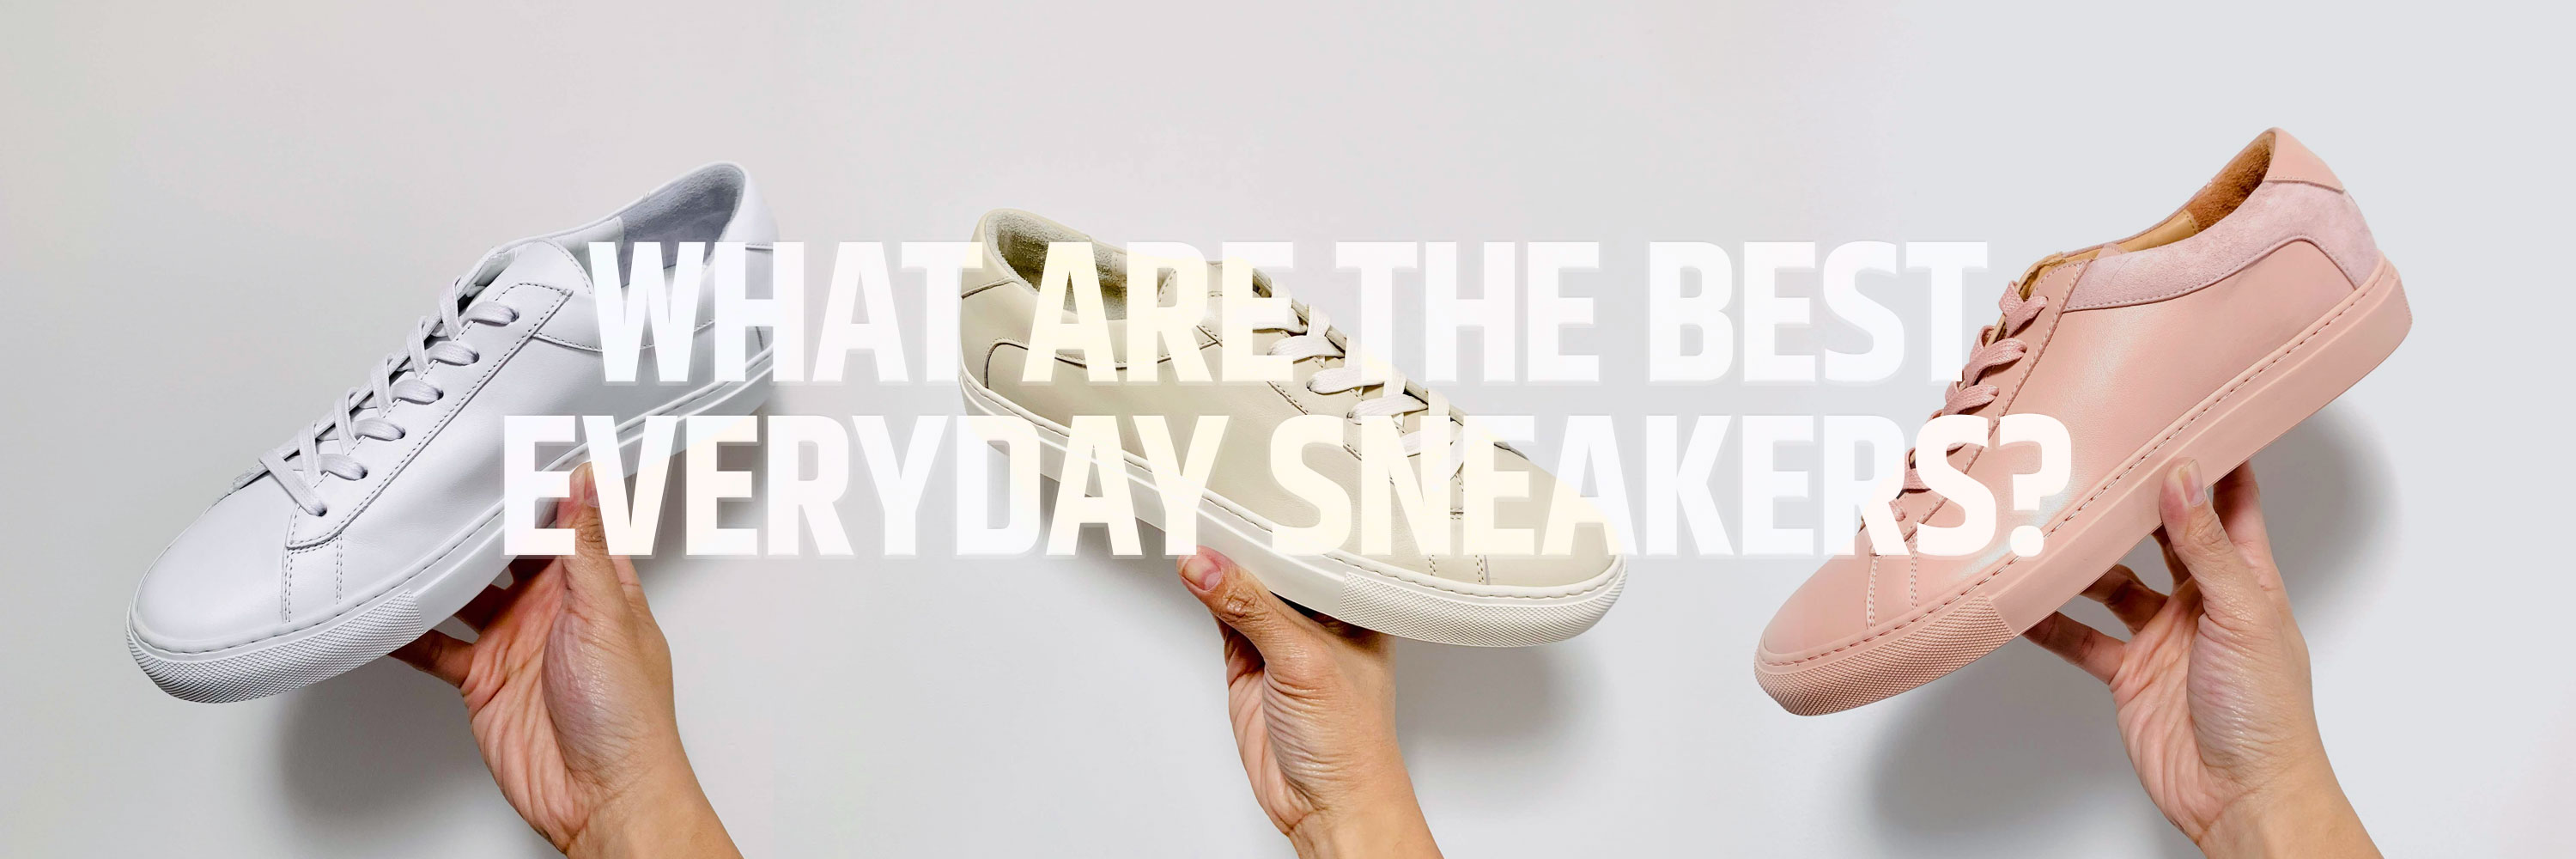 20 of the Best Everyday Sneakers (When You’re Bored of Minimalist White Sneakers)